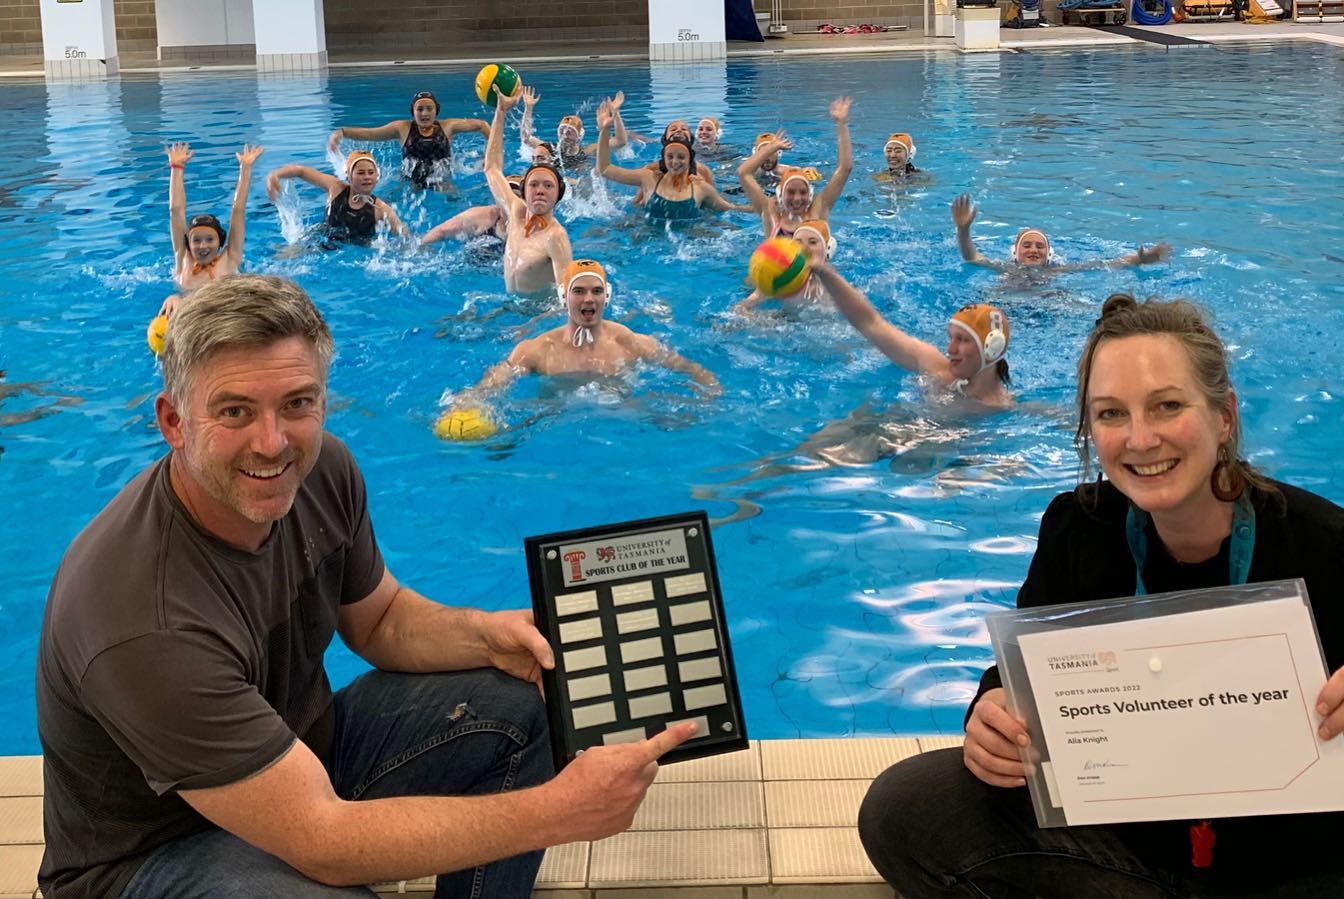 Alia Knight holds a Sports Volunteer of the Year certificate poolside with members of the Honey Badgers Water Polo Club in the water